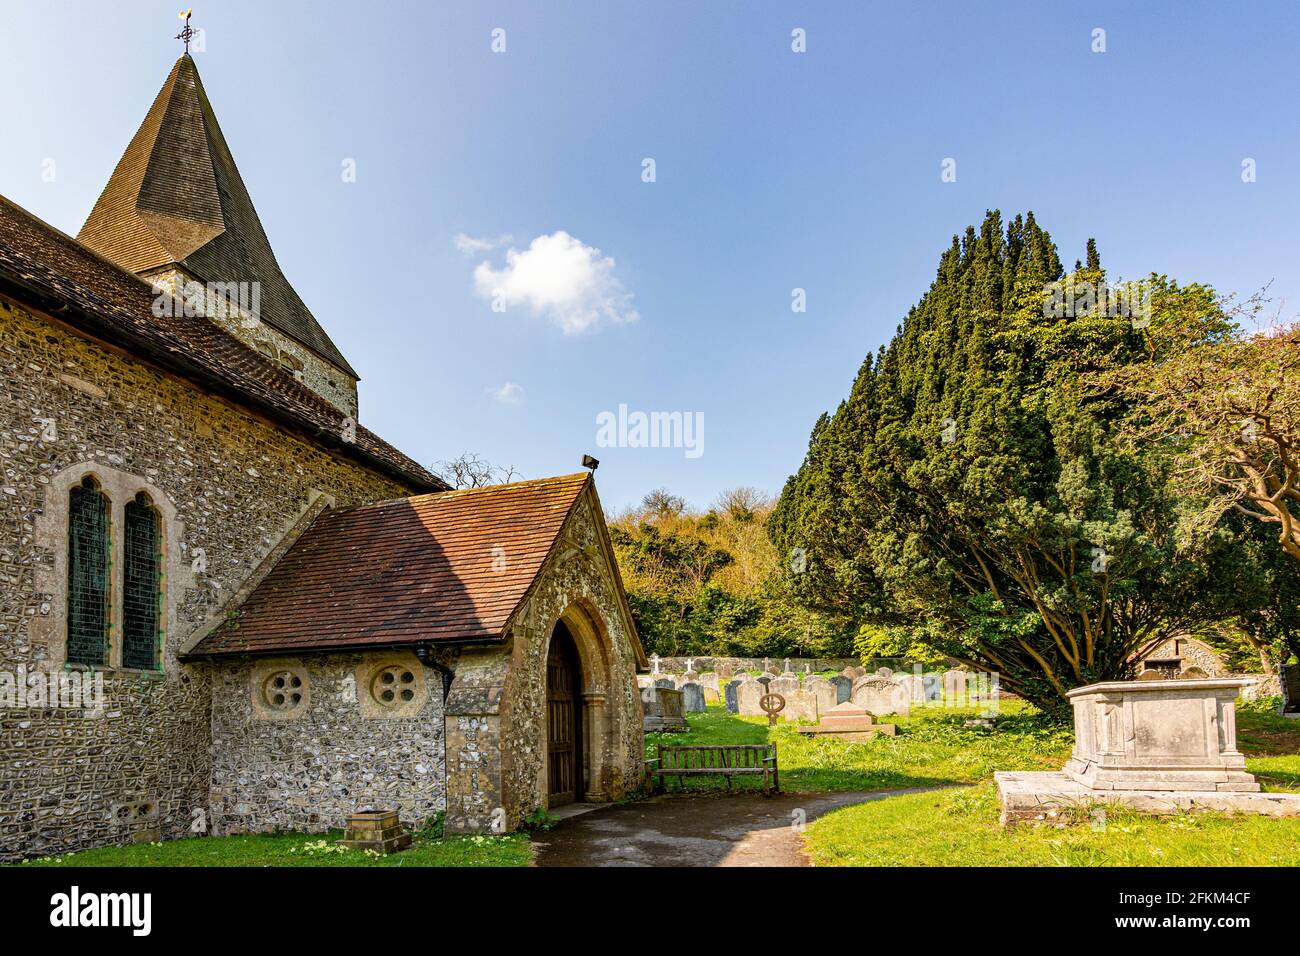 The St. John the Baptist village church, Findon, West Sussex, England, UK. Stock Photo